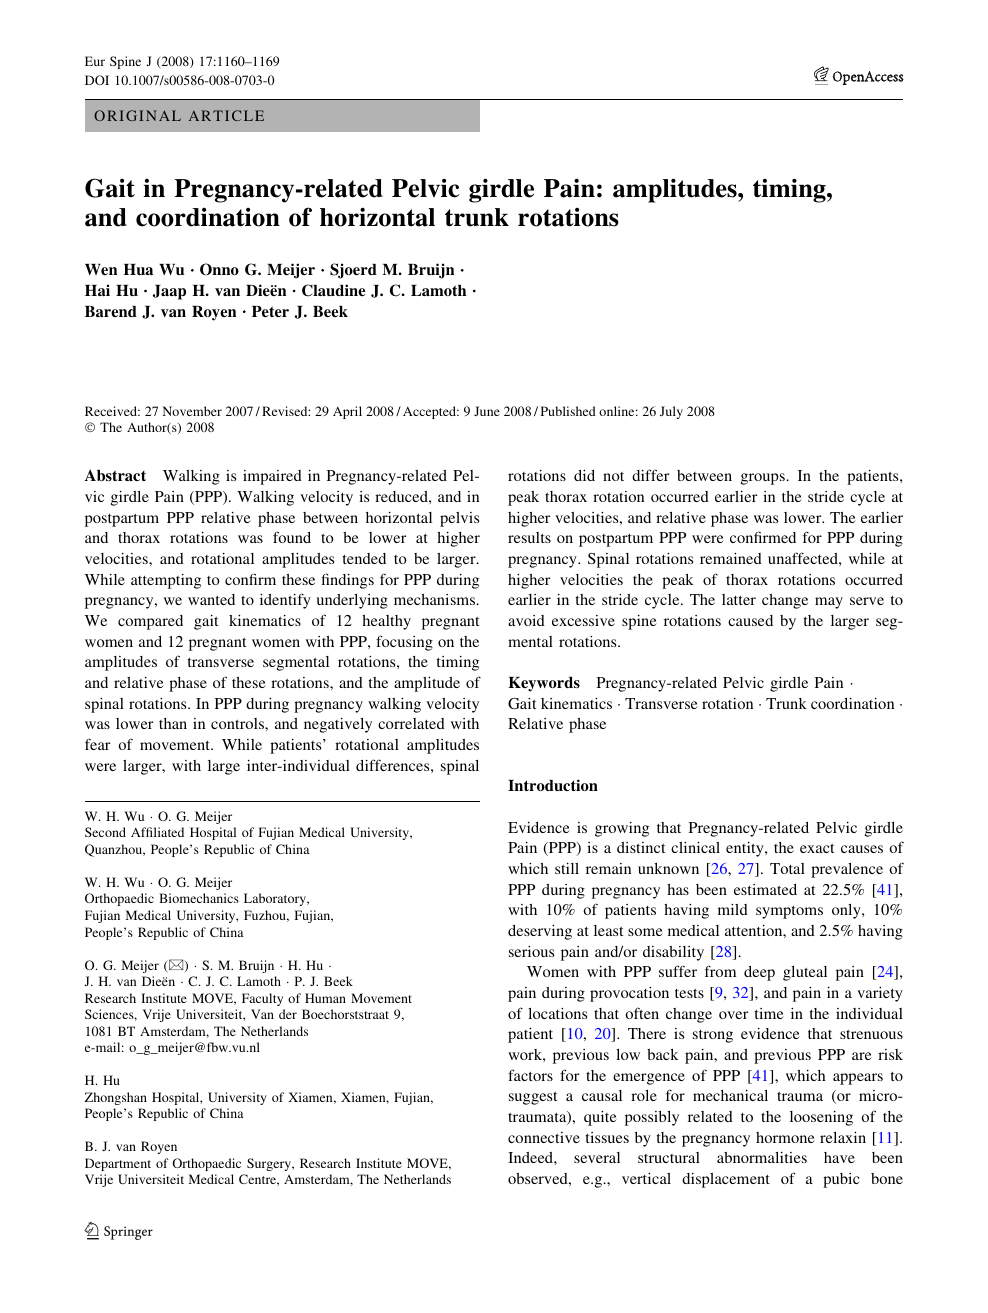 Gait In Pregnancy Related Pelvic Girdle Pain Amplitudes Timing And Coordination Of Horizontal Trunk Rotations Topic Of Research Paper In Medical Engineering Download Scholarly Article Pdf And Read For Free On Cyberleninka